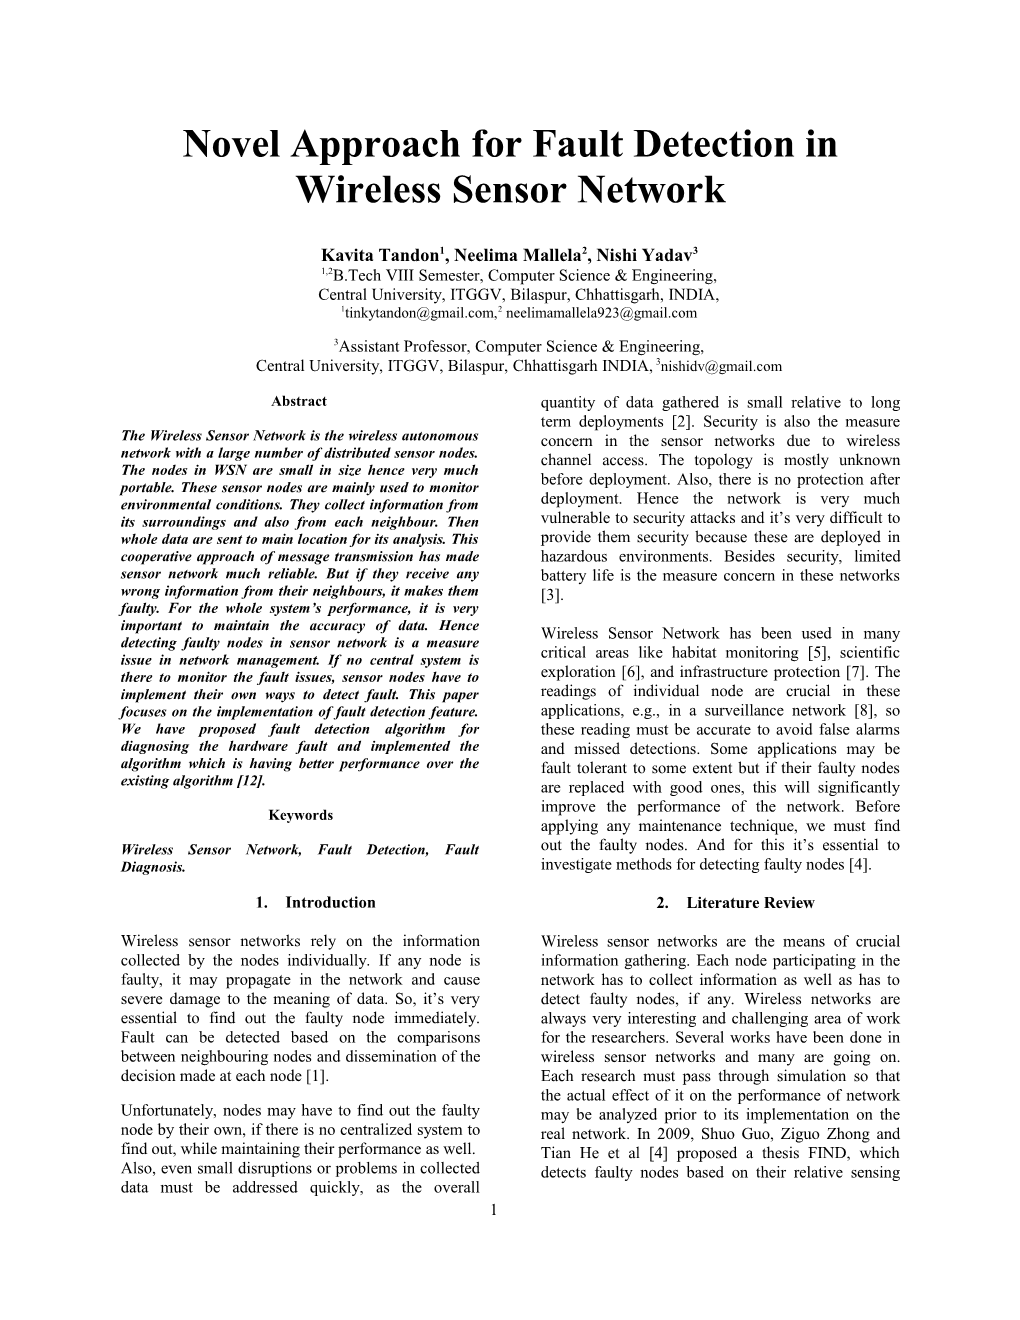 Implementing Fault Detection in Wireless Sensor Network